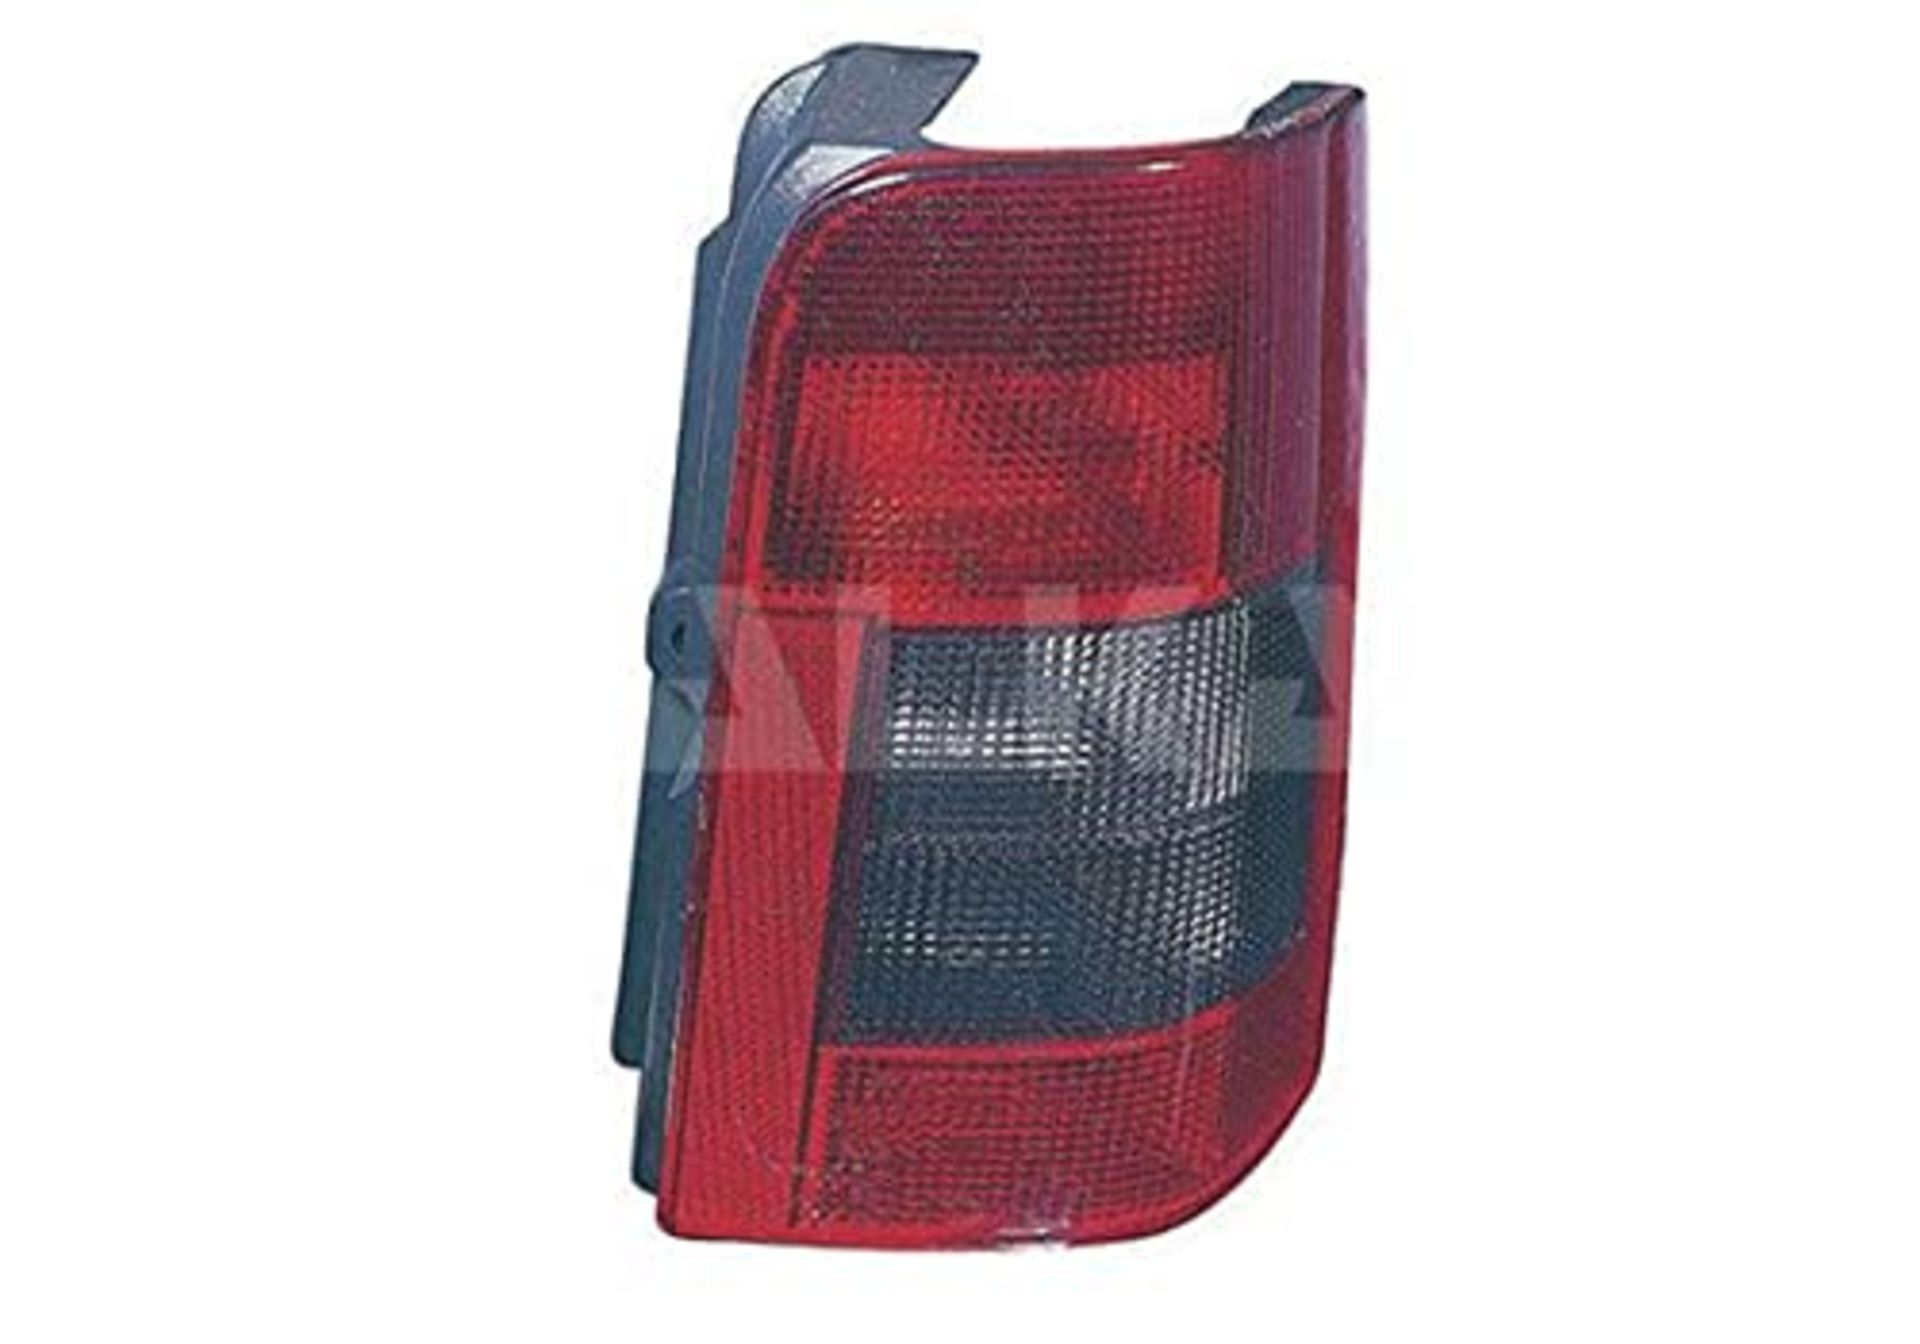 Alkar 2212974 Rear Light, Without Bulb Holder (Optical Group), Smoke, Right Yorka Type